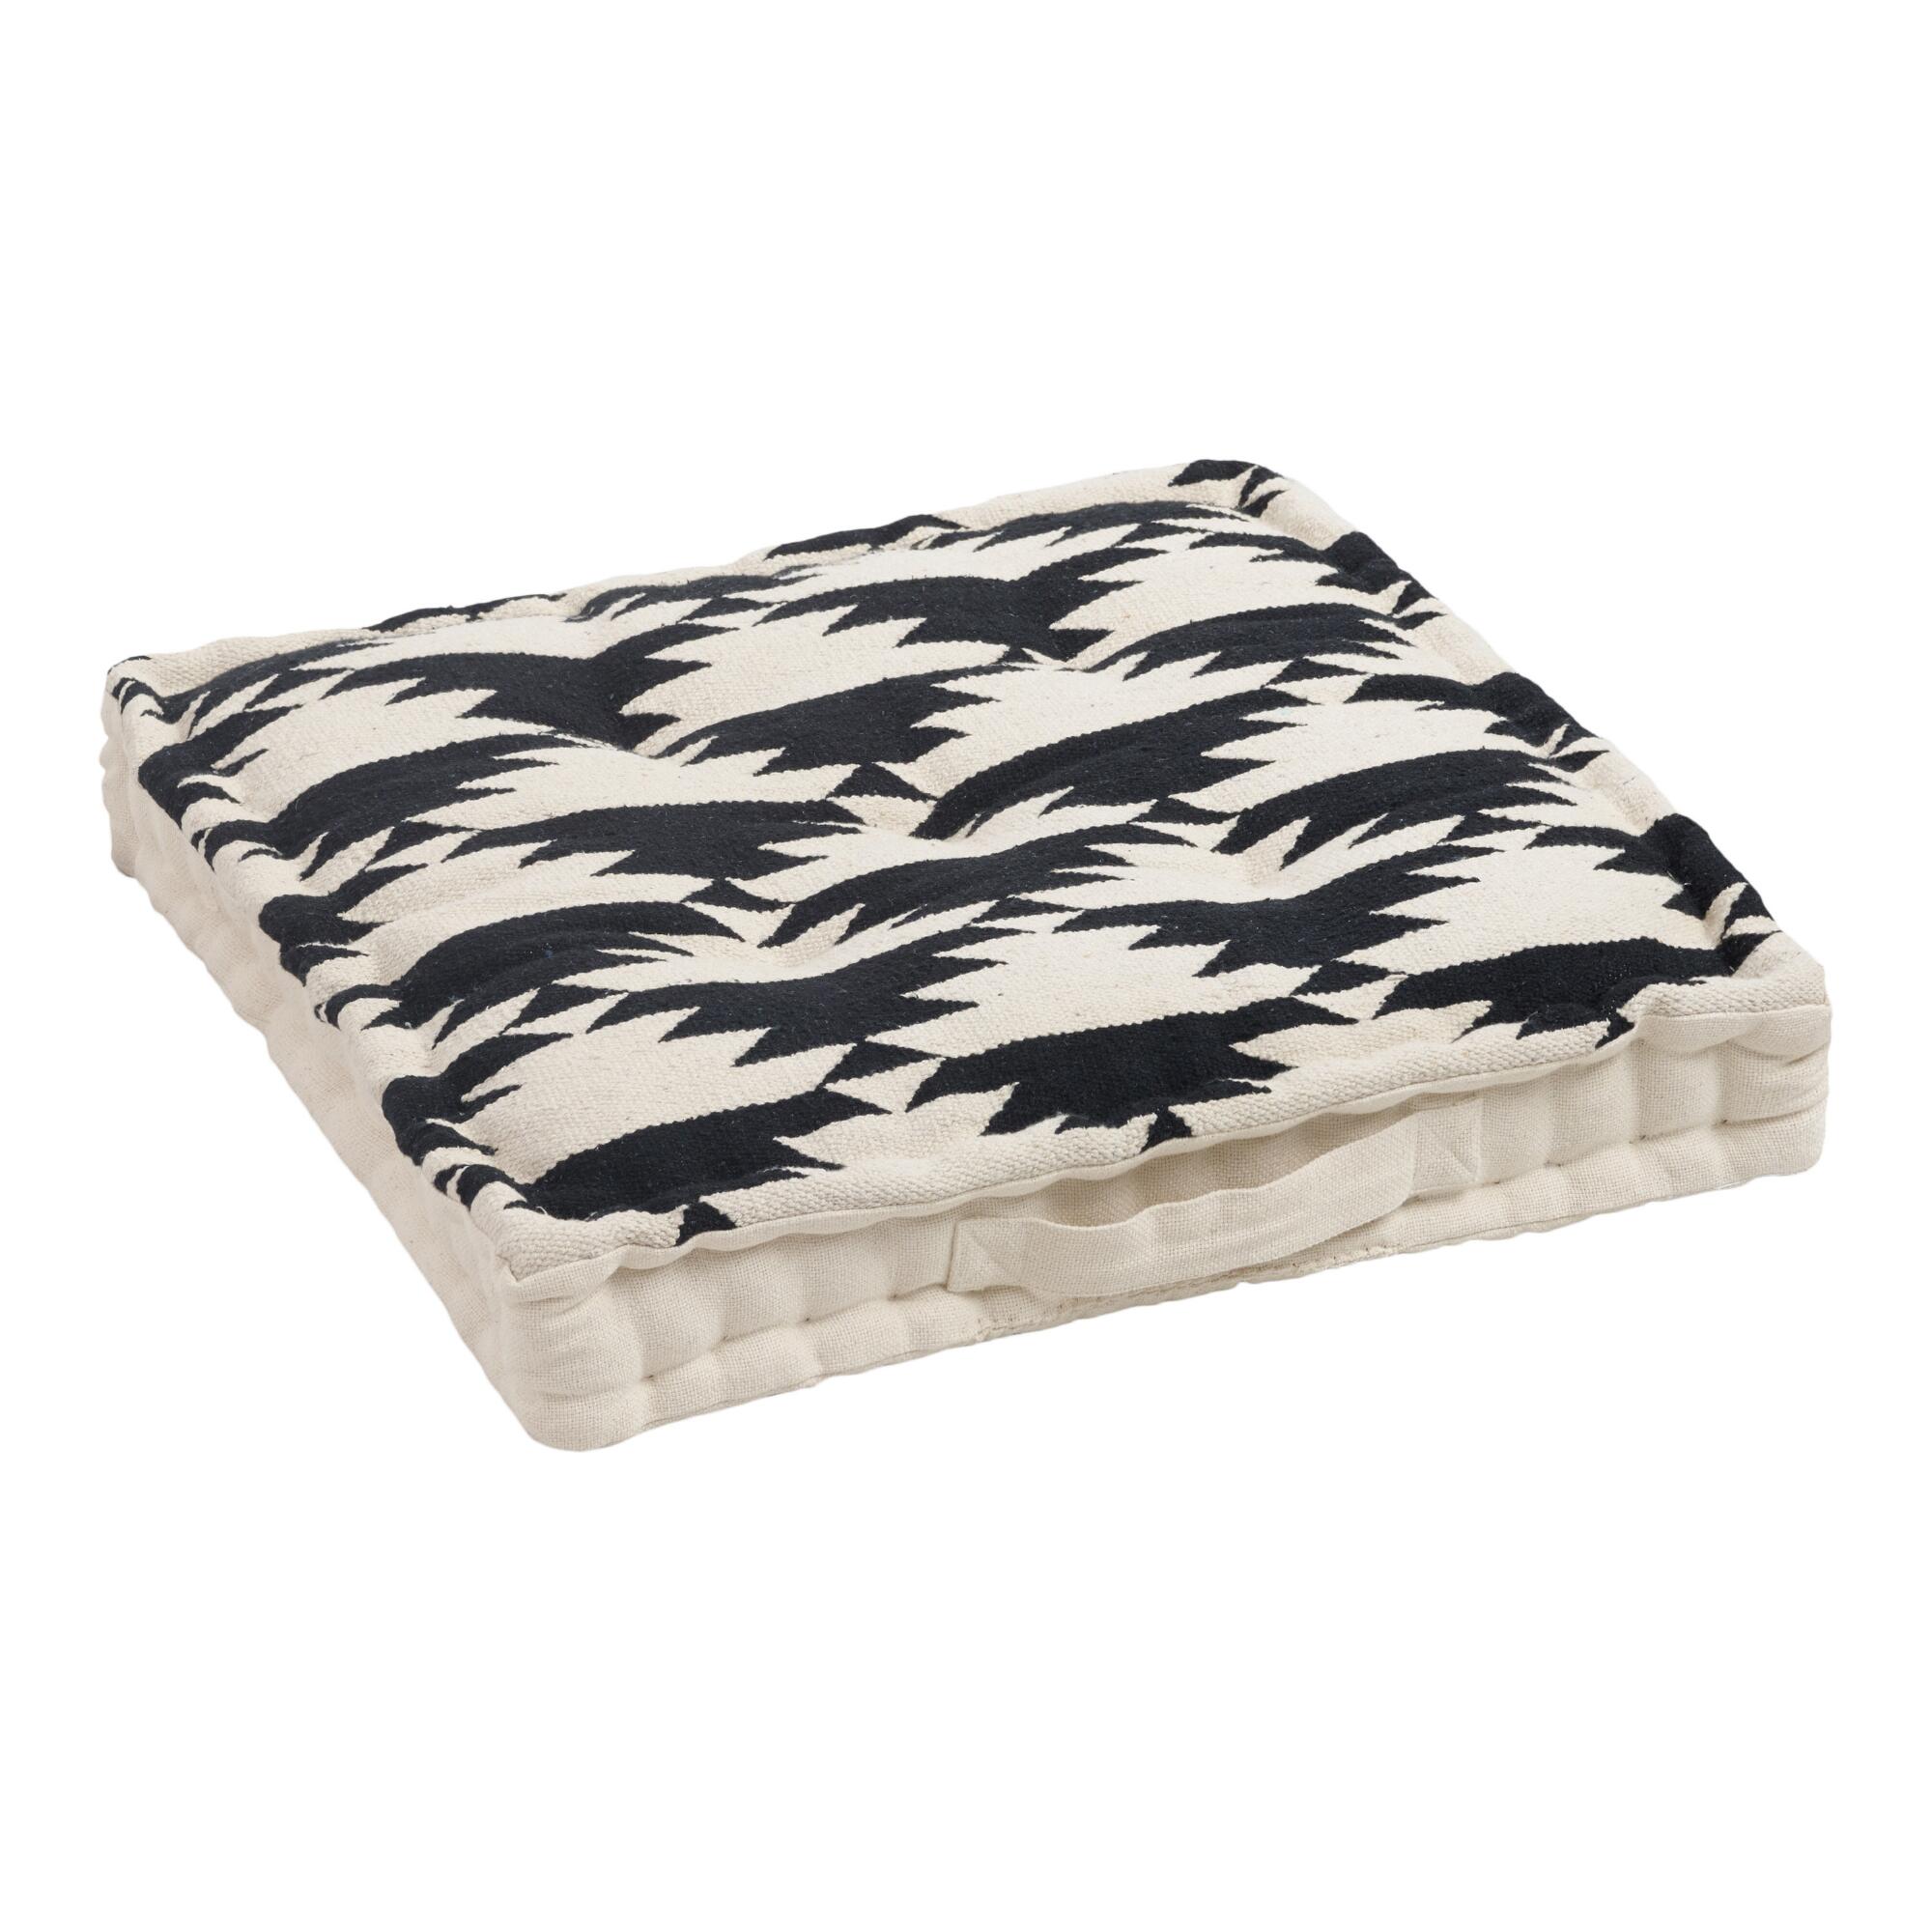 Black and White Dhurrie Weave Floor Cushion: Black/White - Cotton by World Market